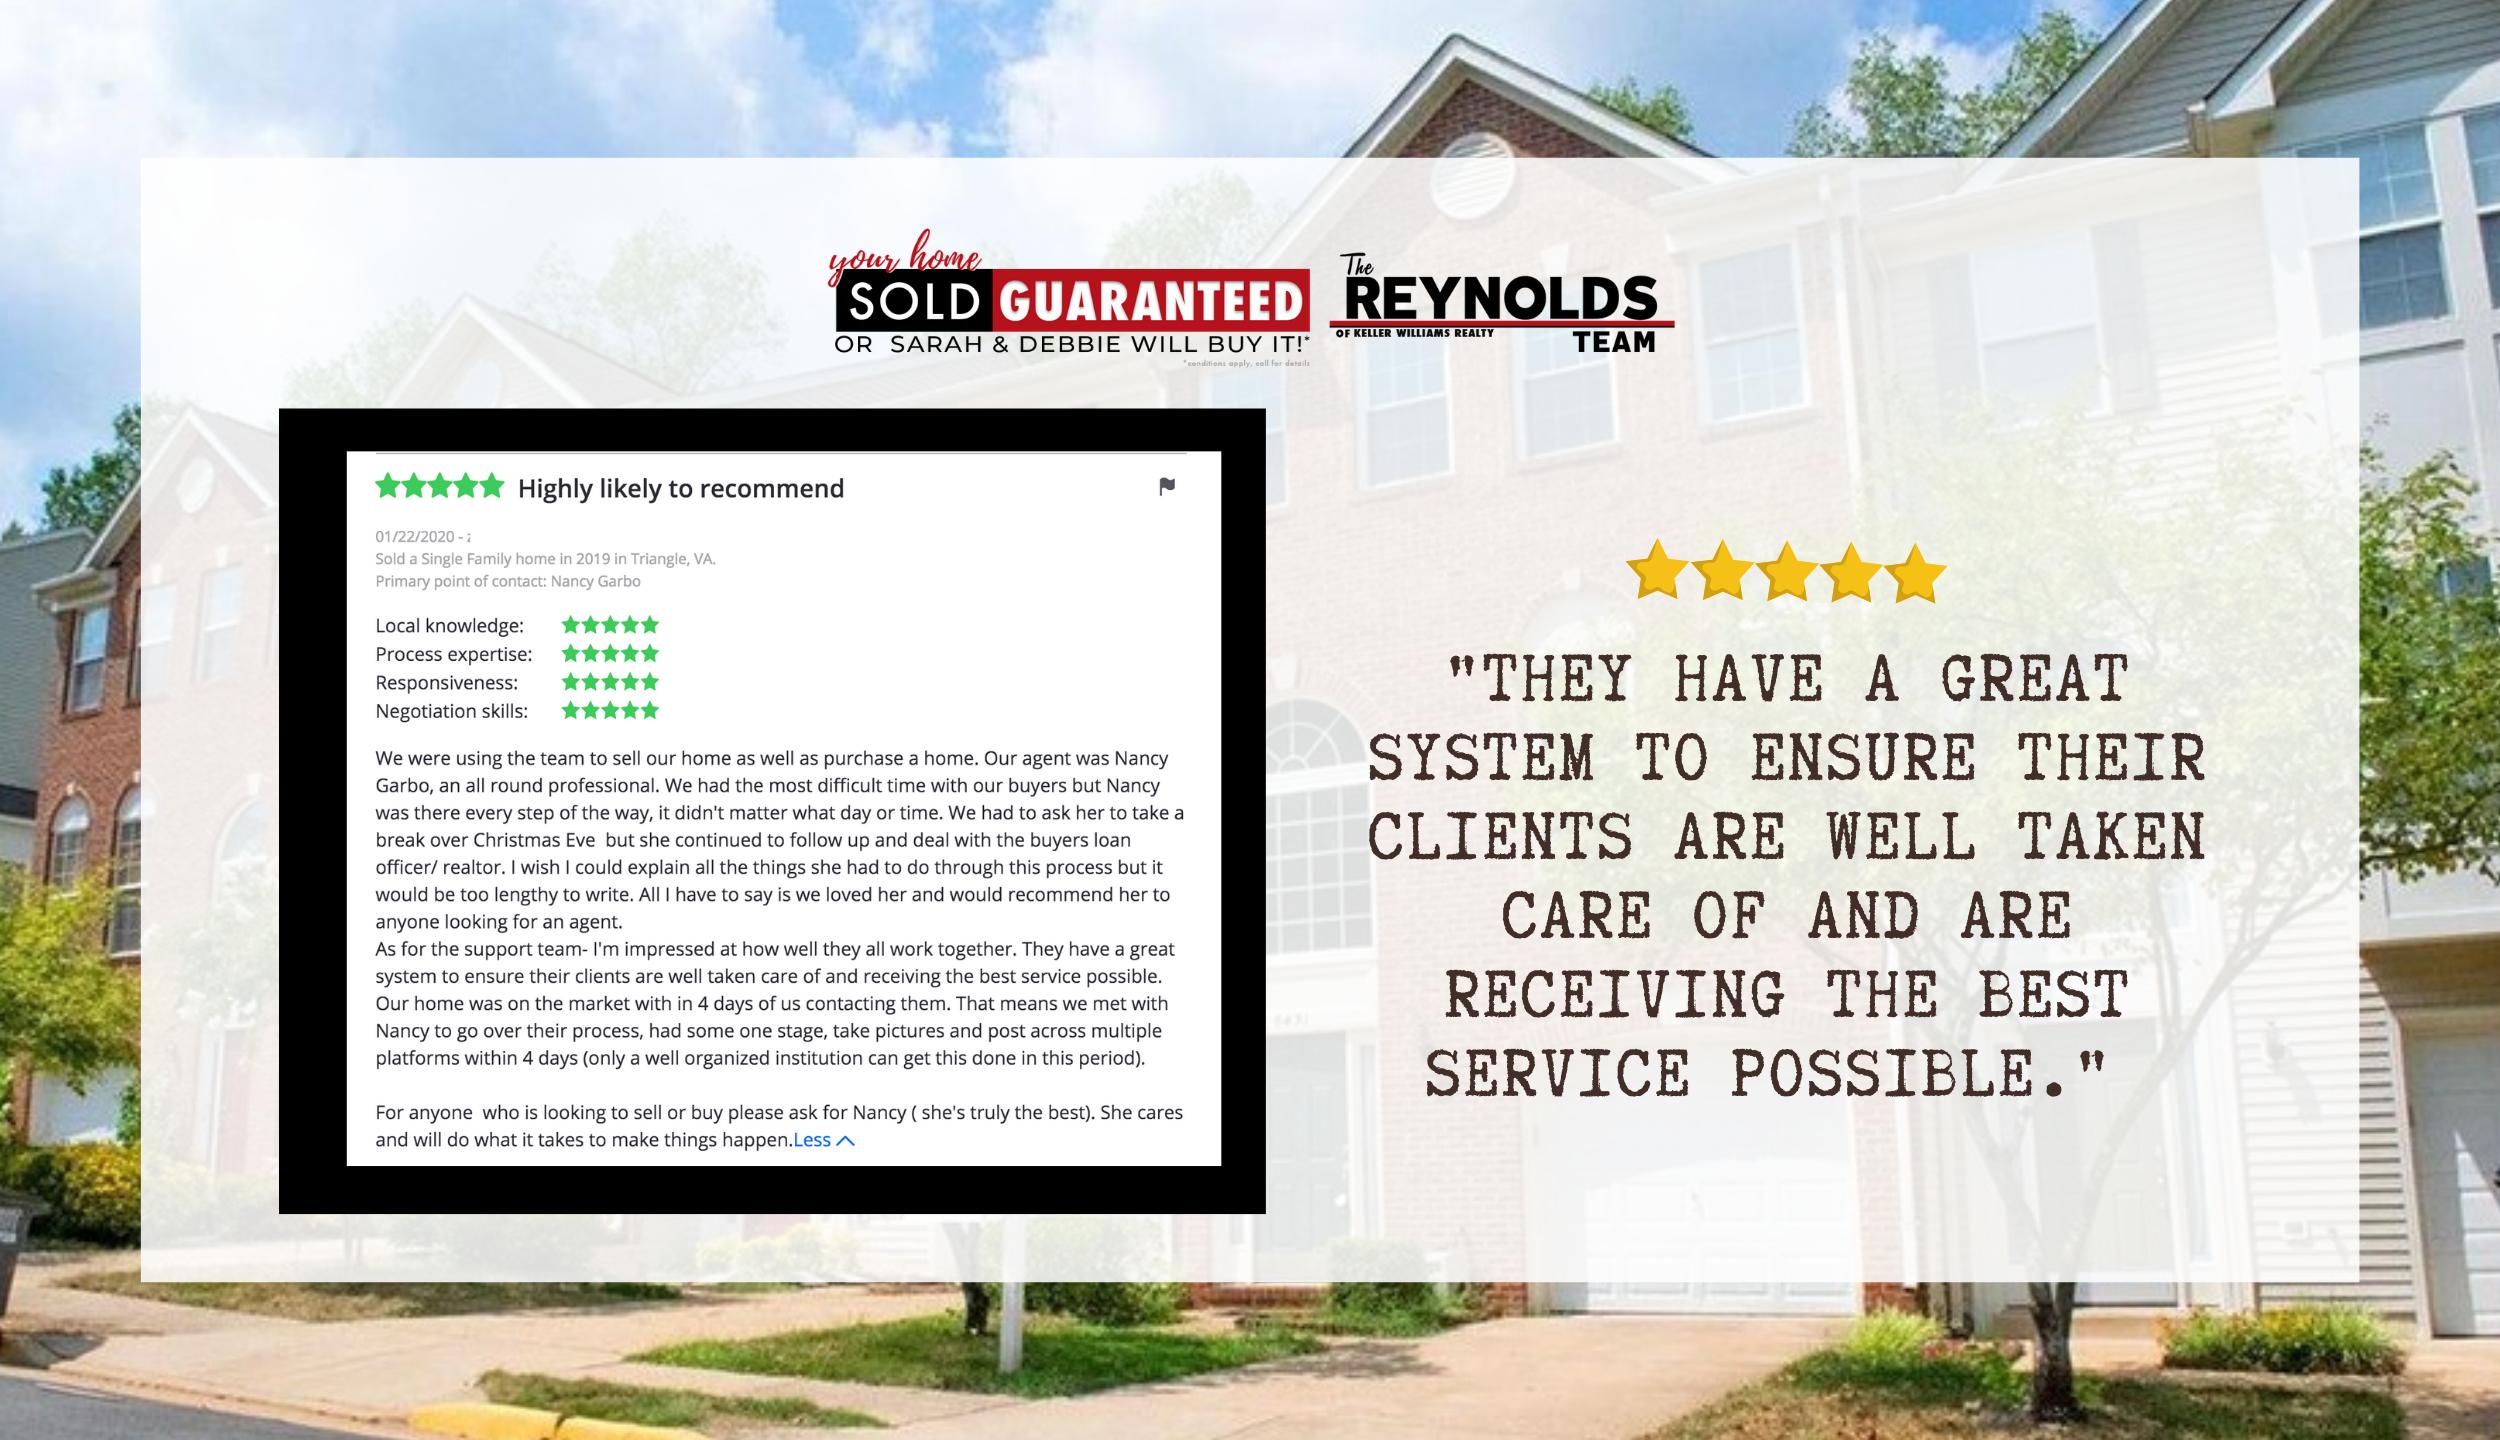 The Reynolds Team was Able to Get the Job Done!